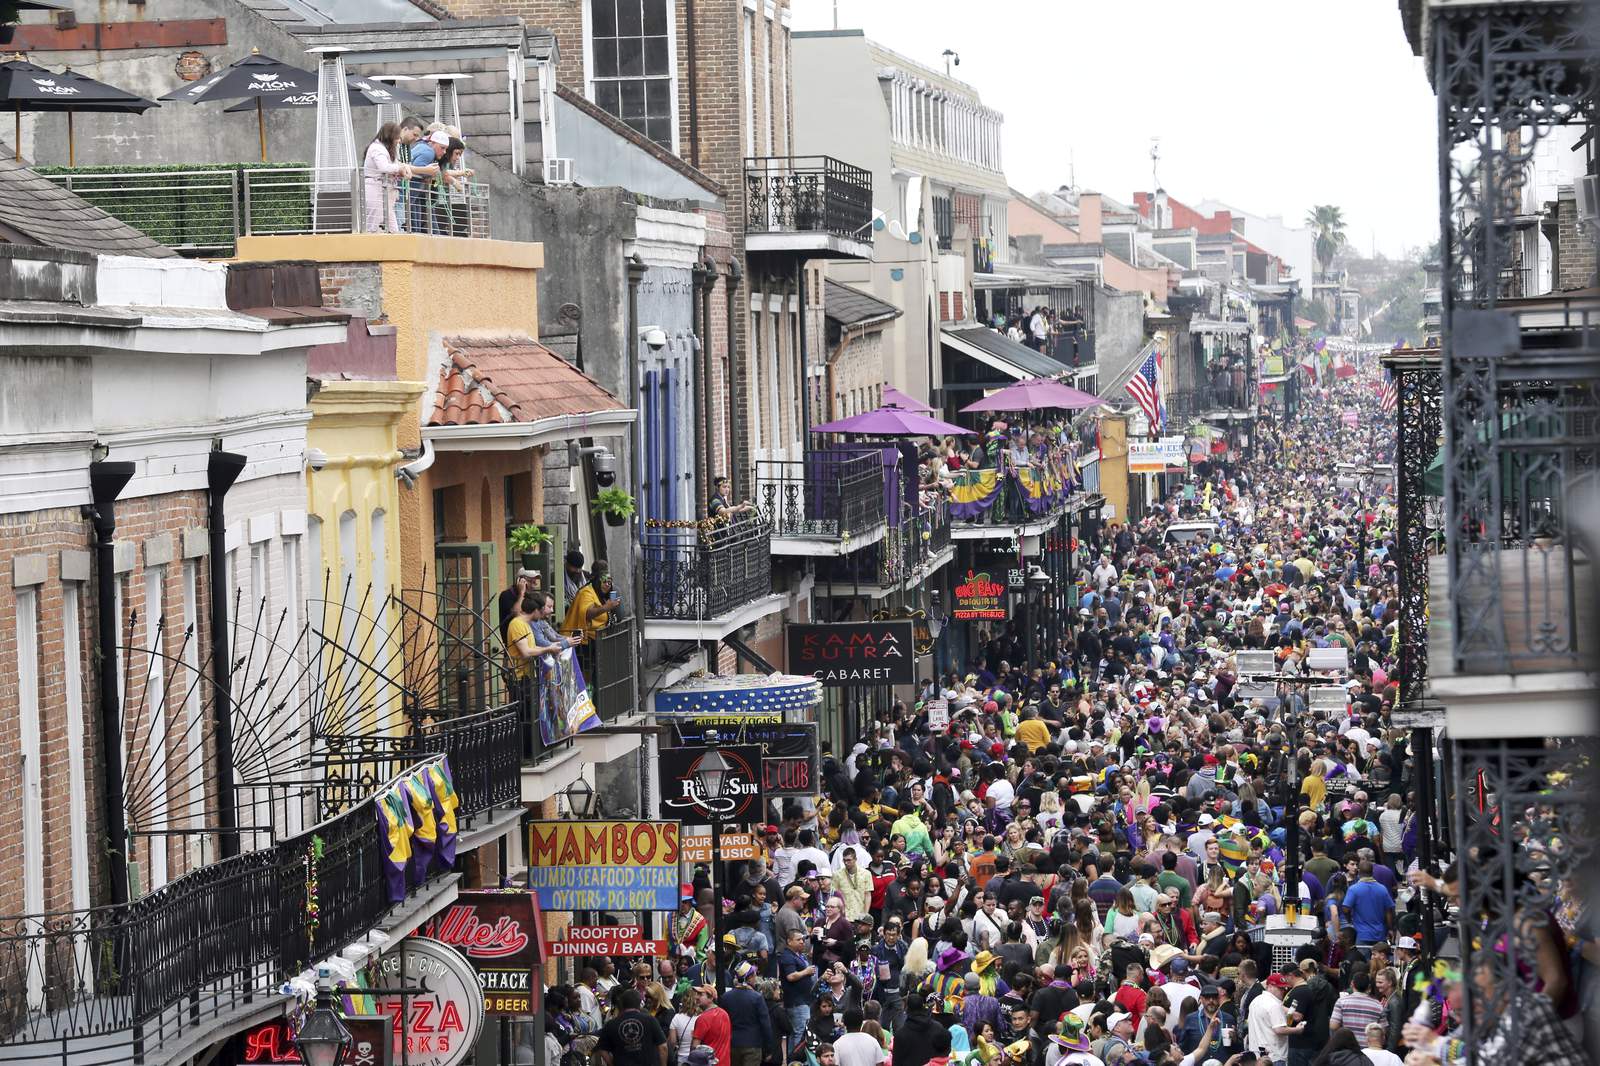 New Orleans mayor says city will have to think about canceling Mardi Gras 2021